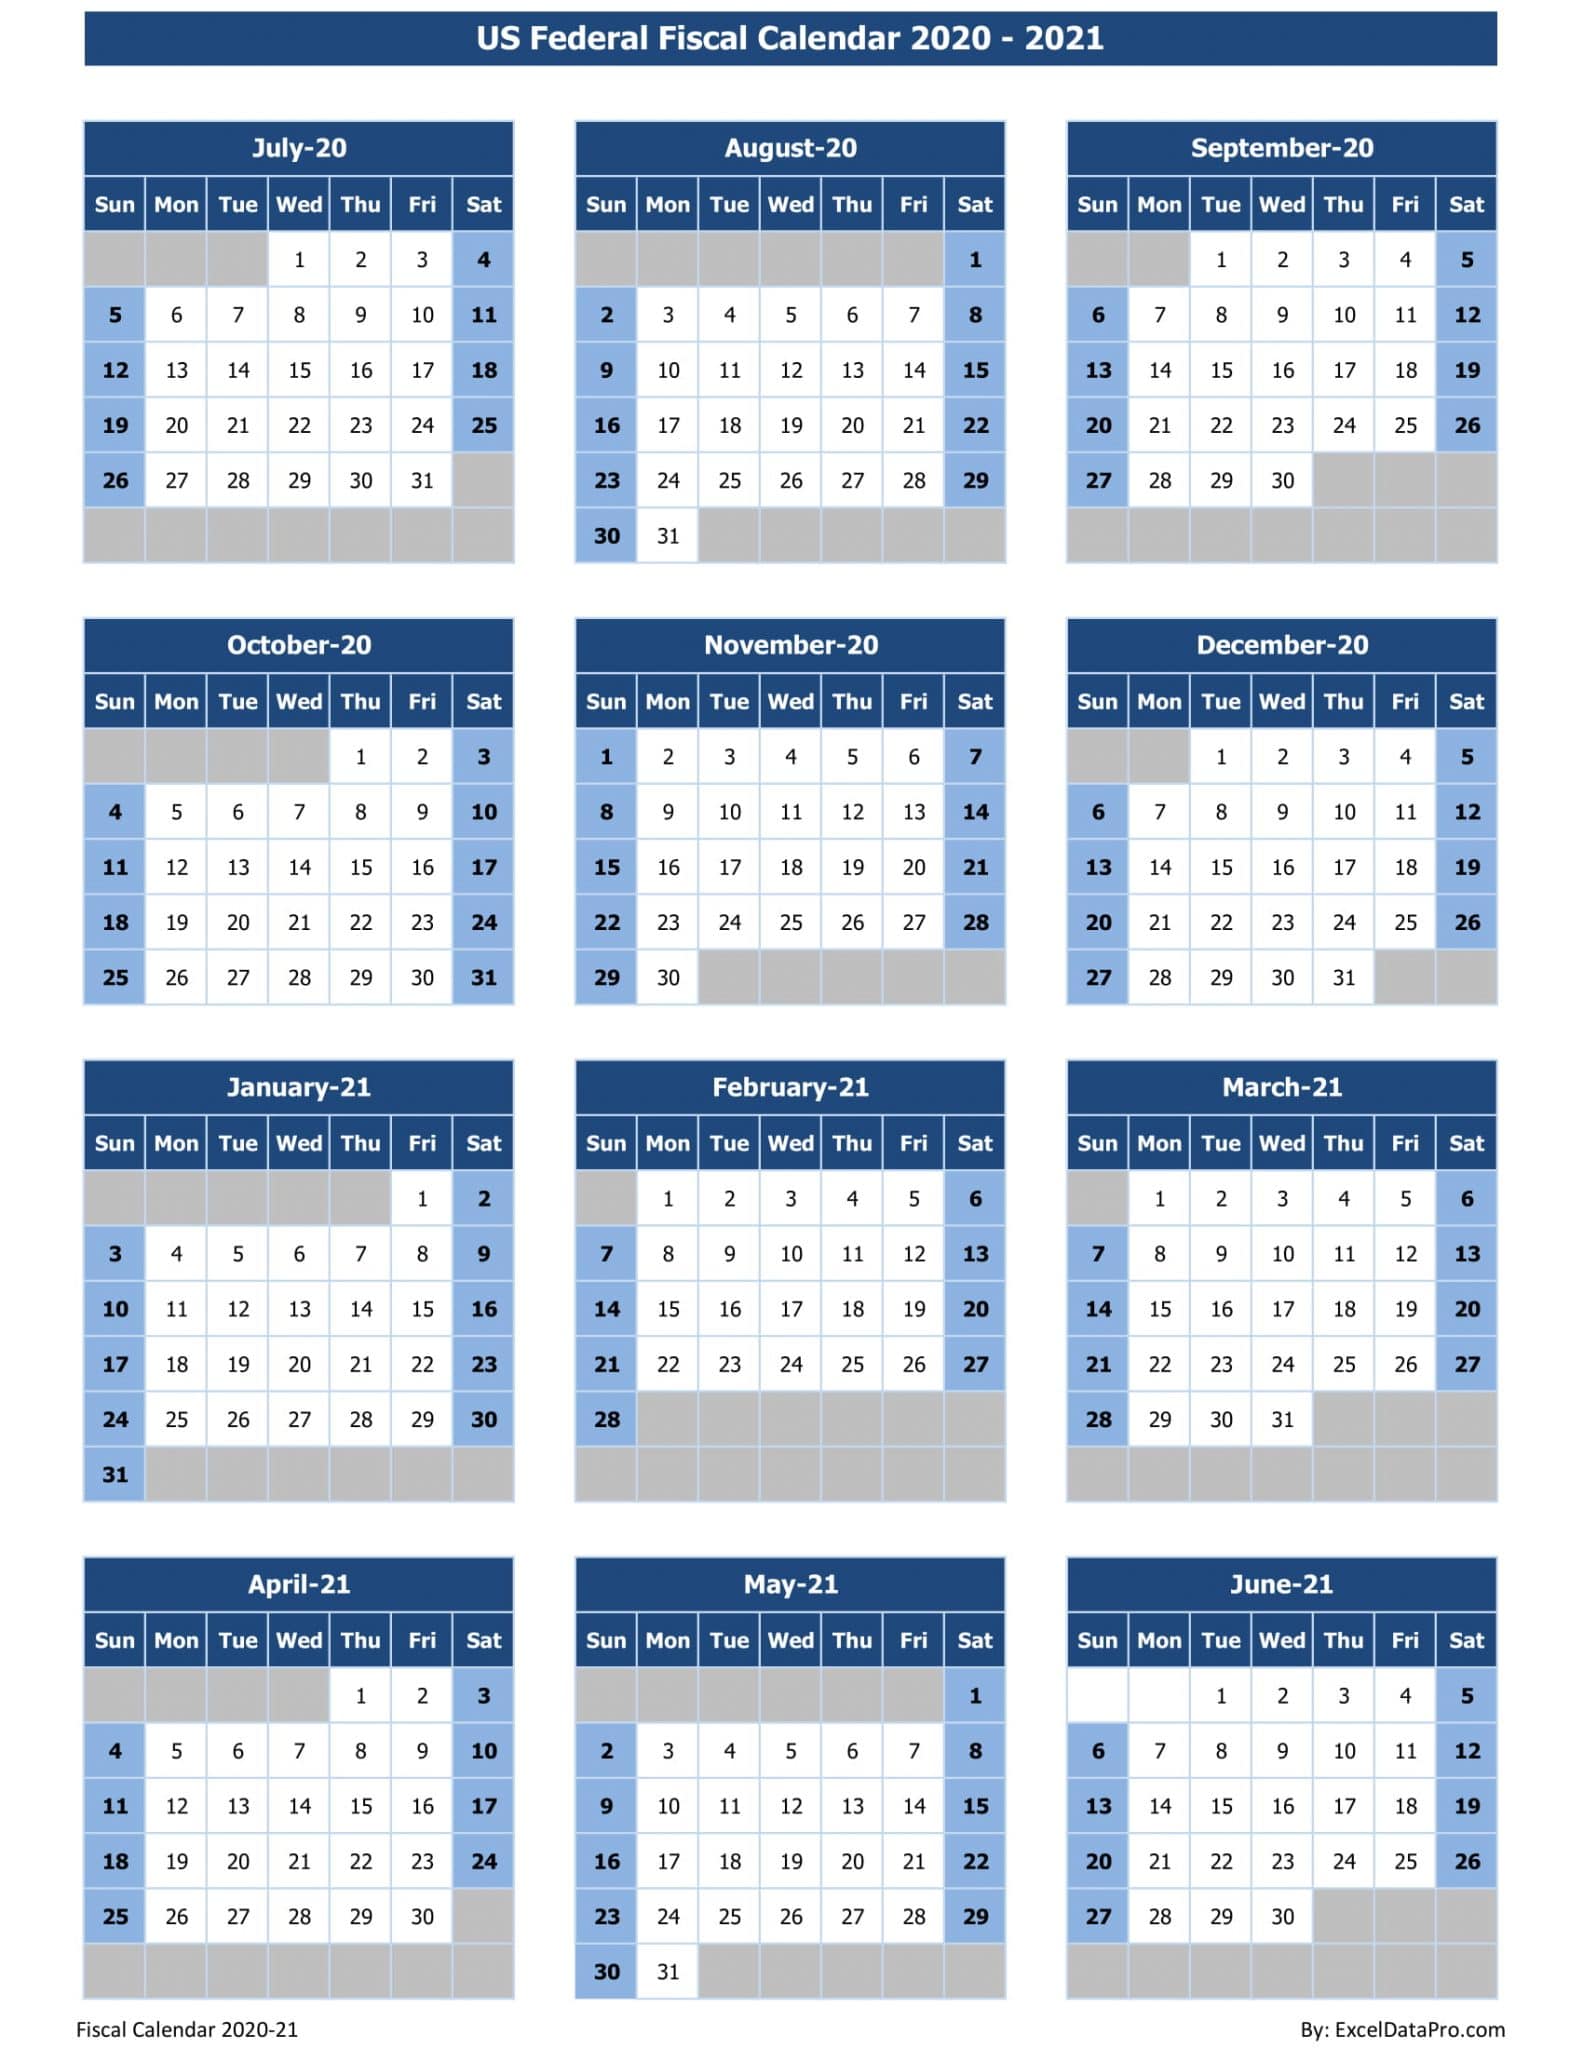 Download US Federal Fiscal Calendar 2020-21 Excel Template - ExcelDataPro